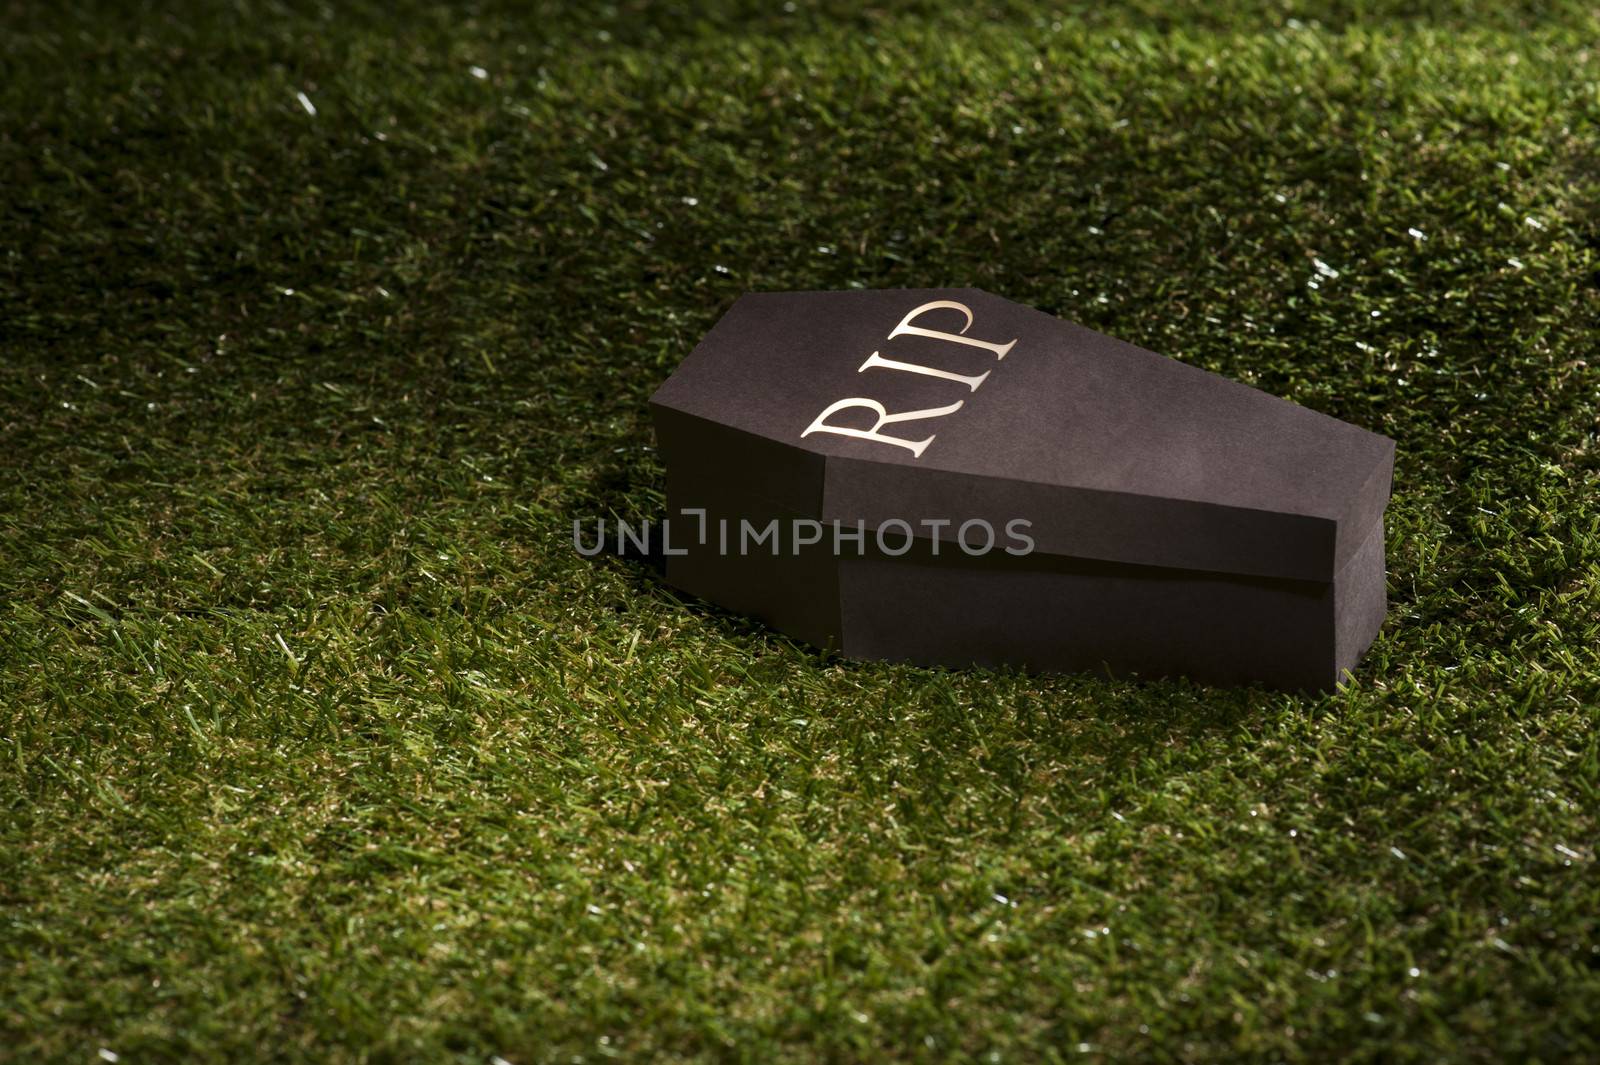 Halloween coffin on lawn with letters RIP